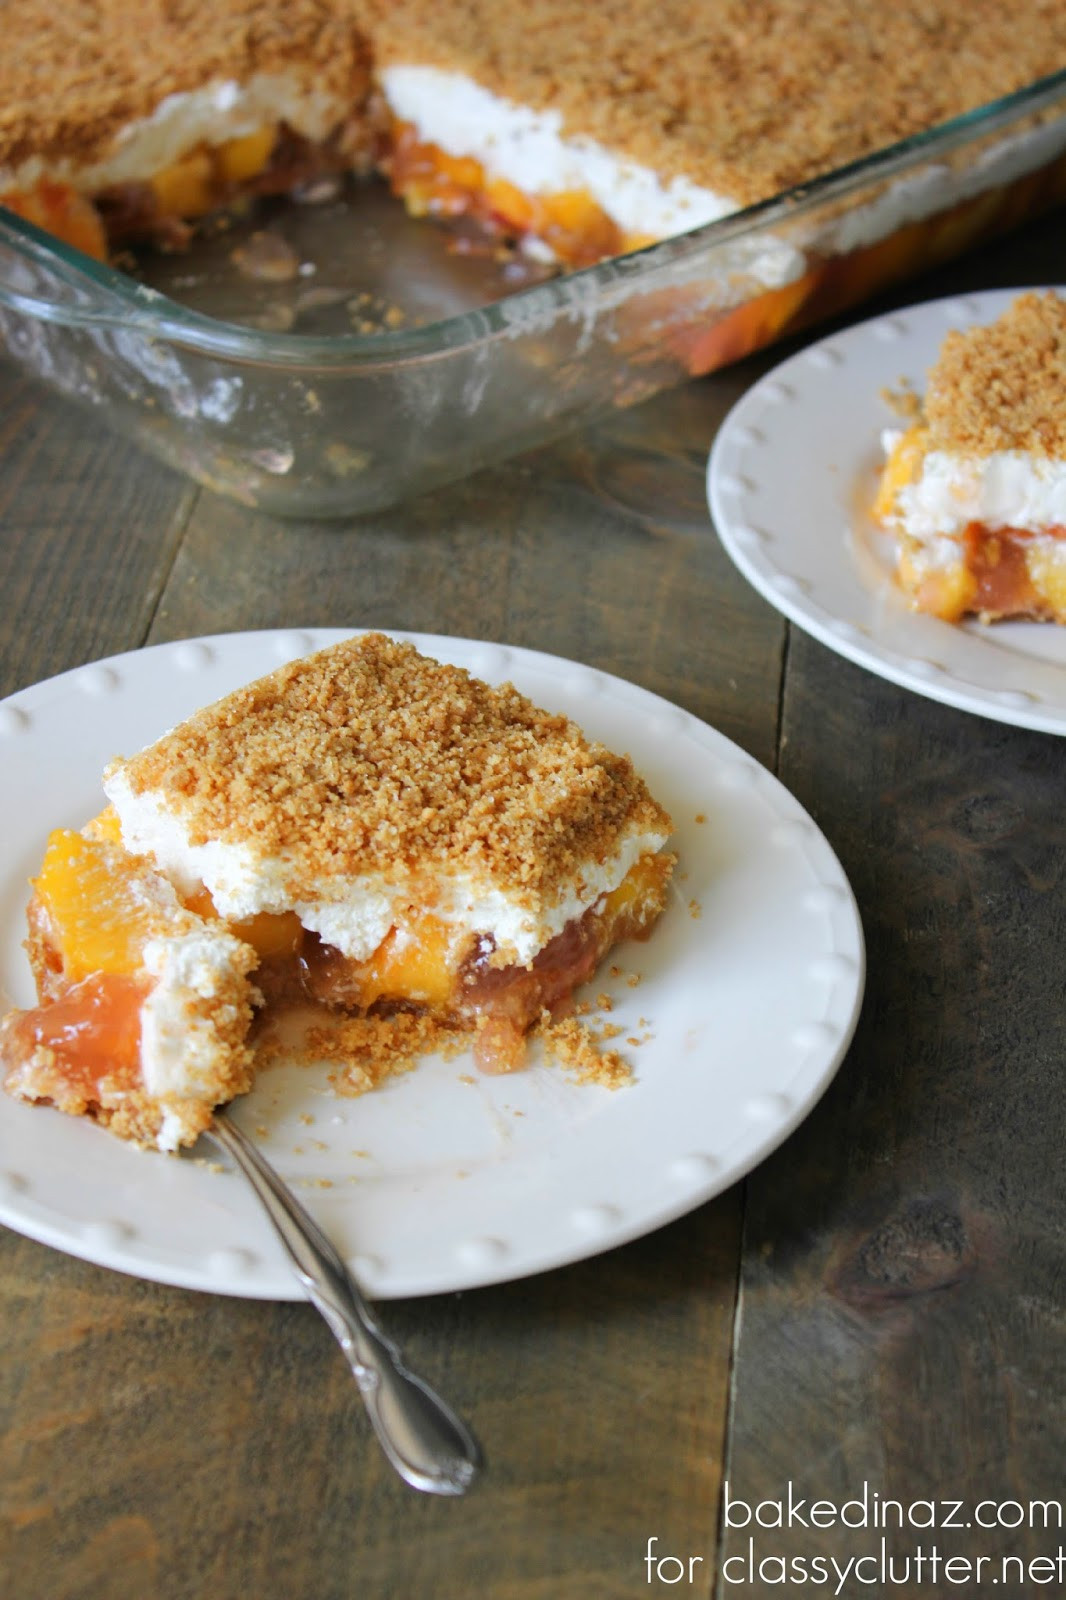 Fresh Peach Desserts Recipes
 1000 images about desserts and goo s on Pinterest